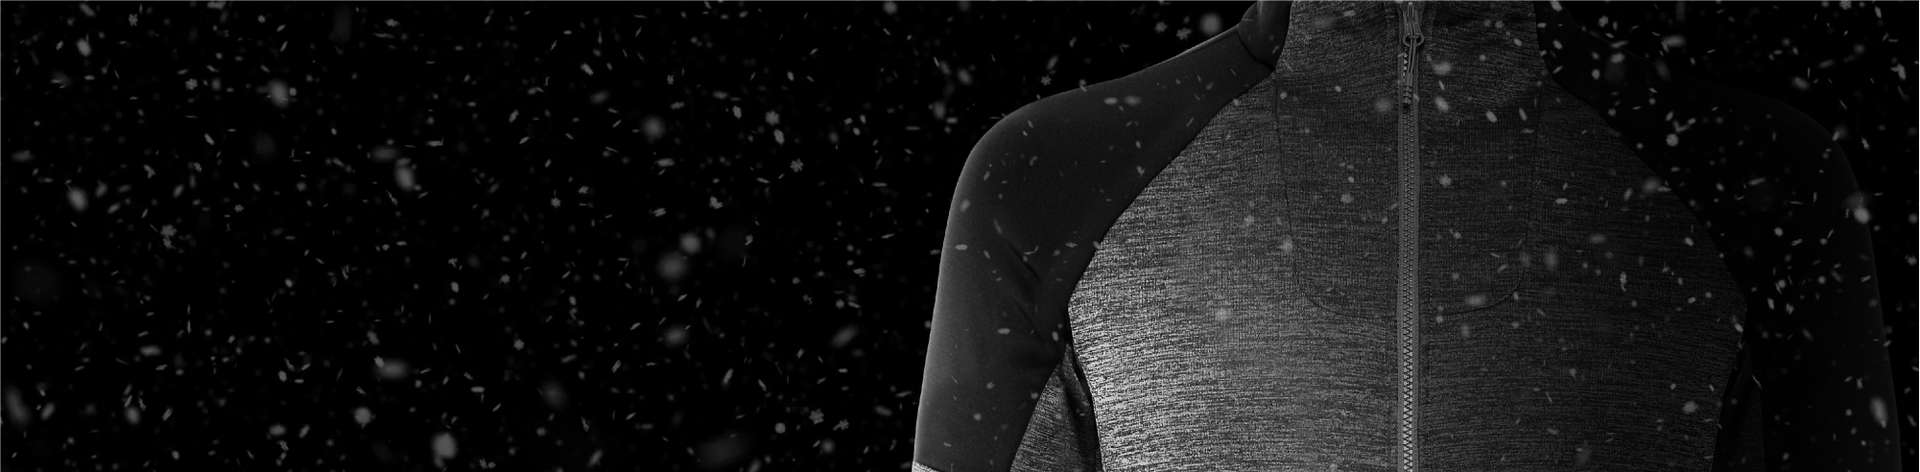 Dainese Winter Sports - termical layer